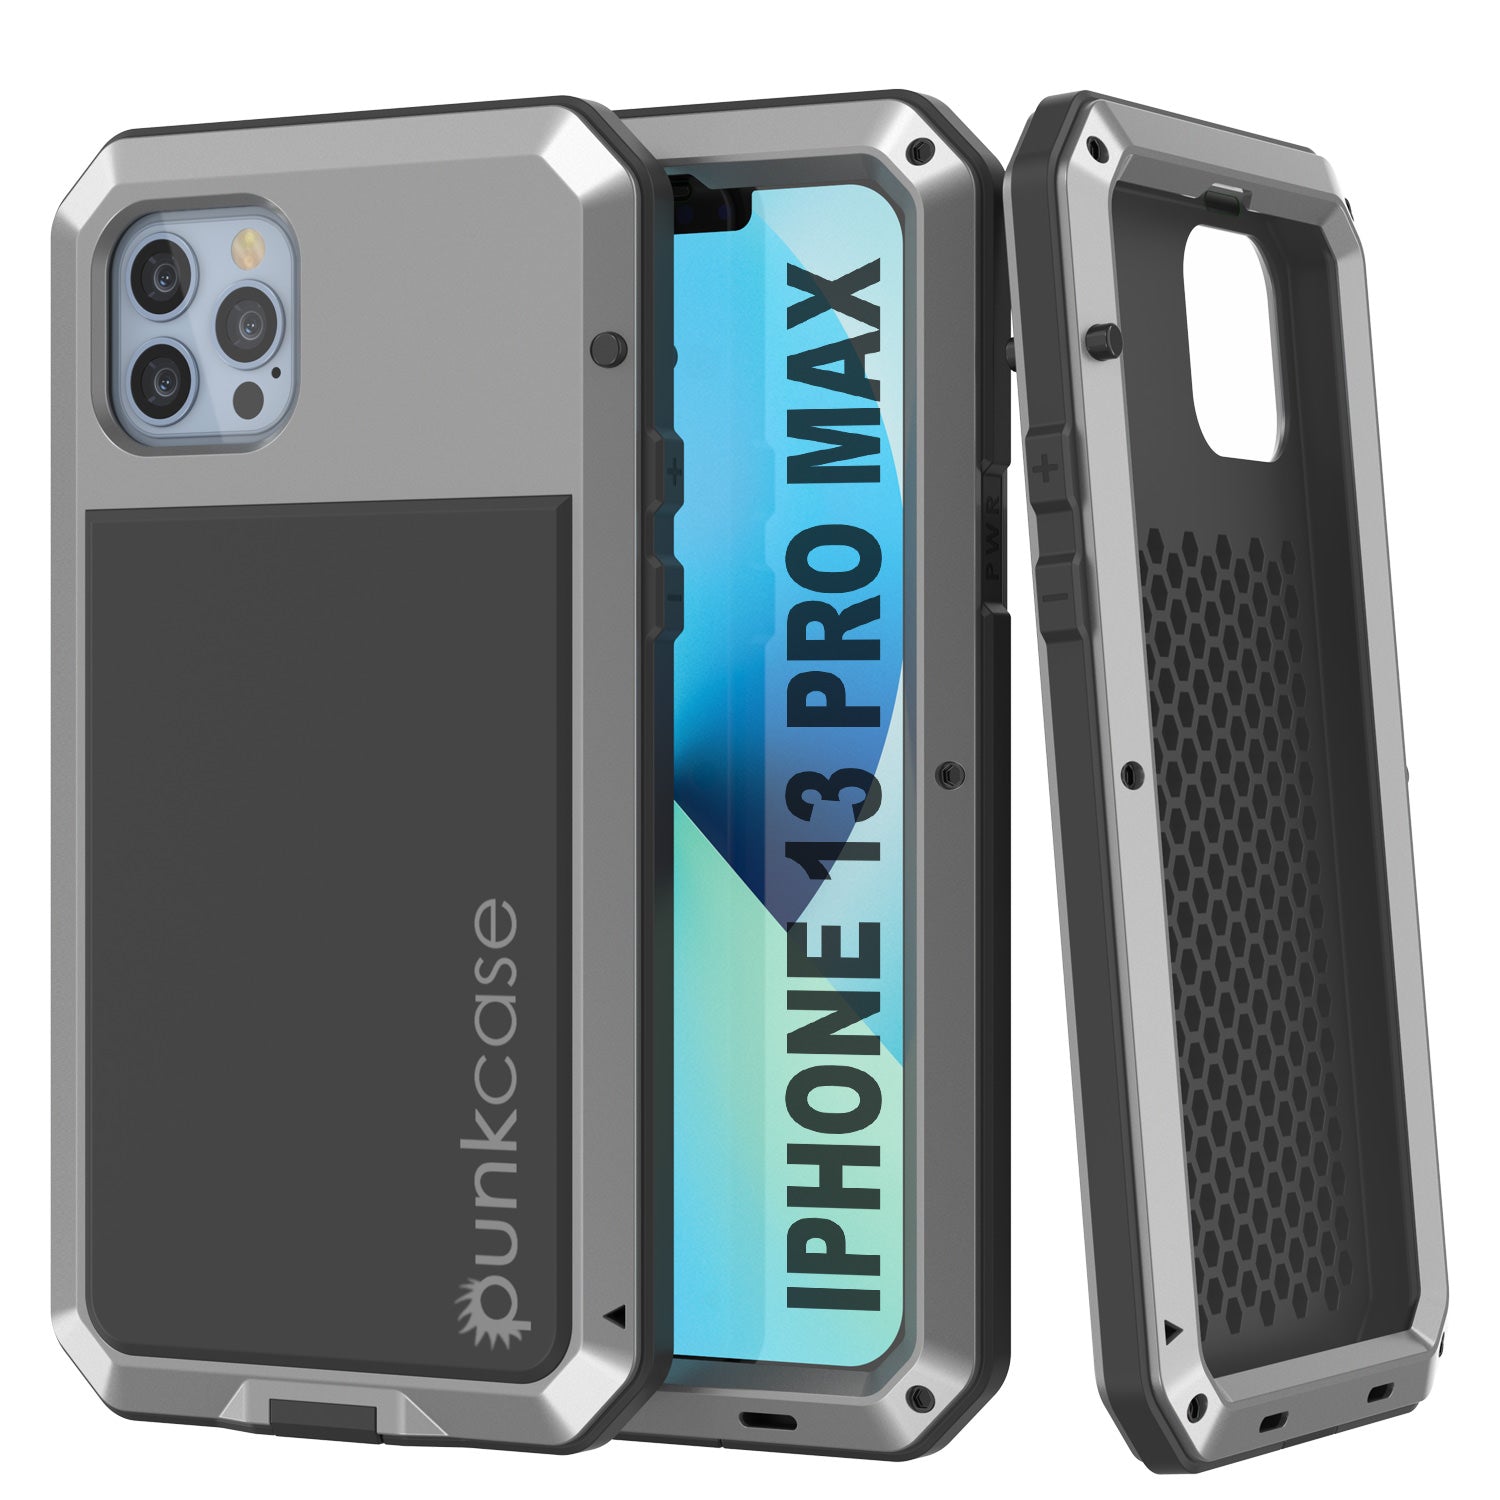 Punkcase iPhone 13 Pro Max Metal Case, Heavy Duty Military Grade Armor Cover [Shock Proof] Full Body Hard [Silver]